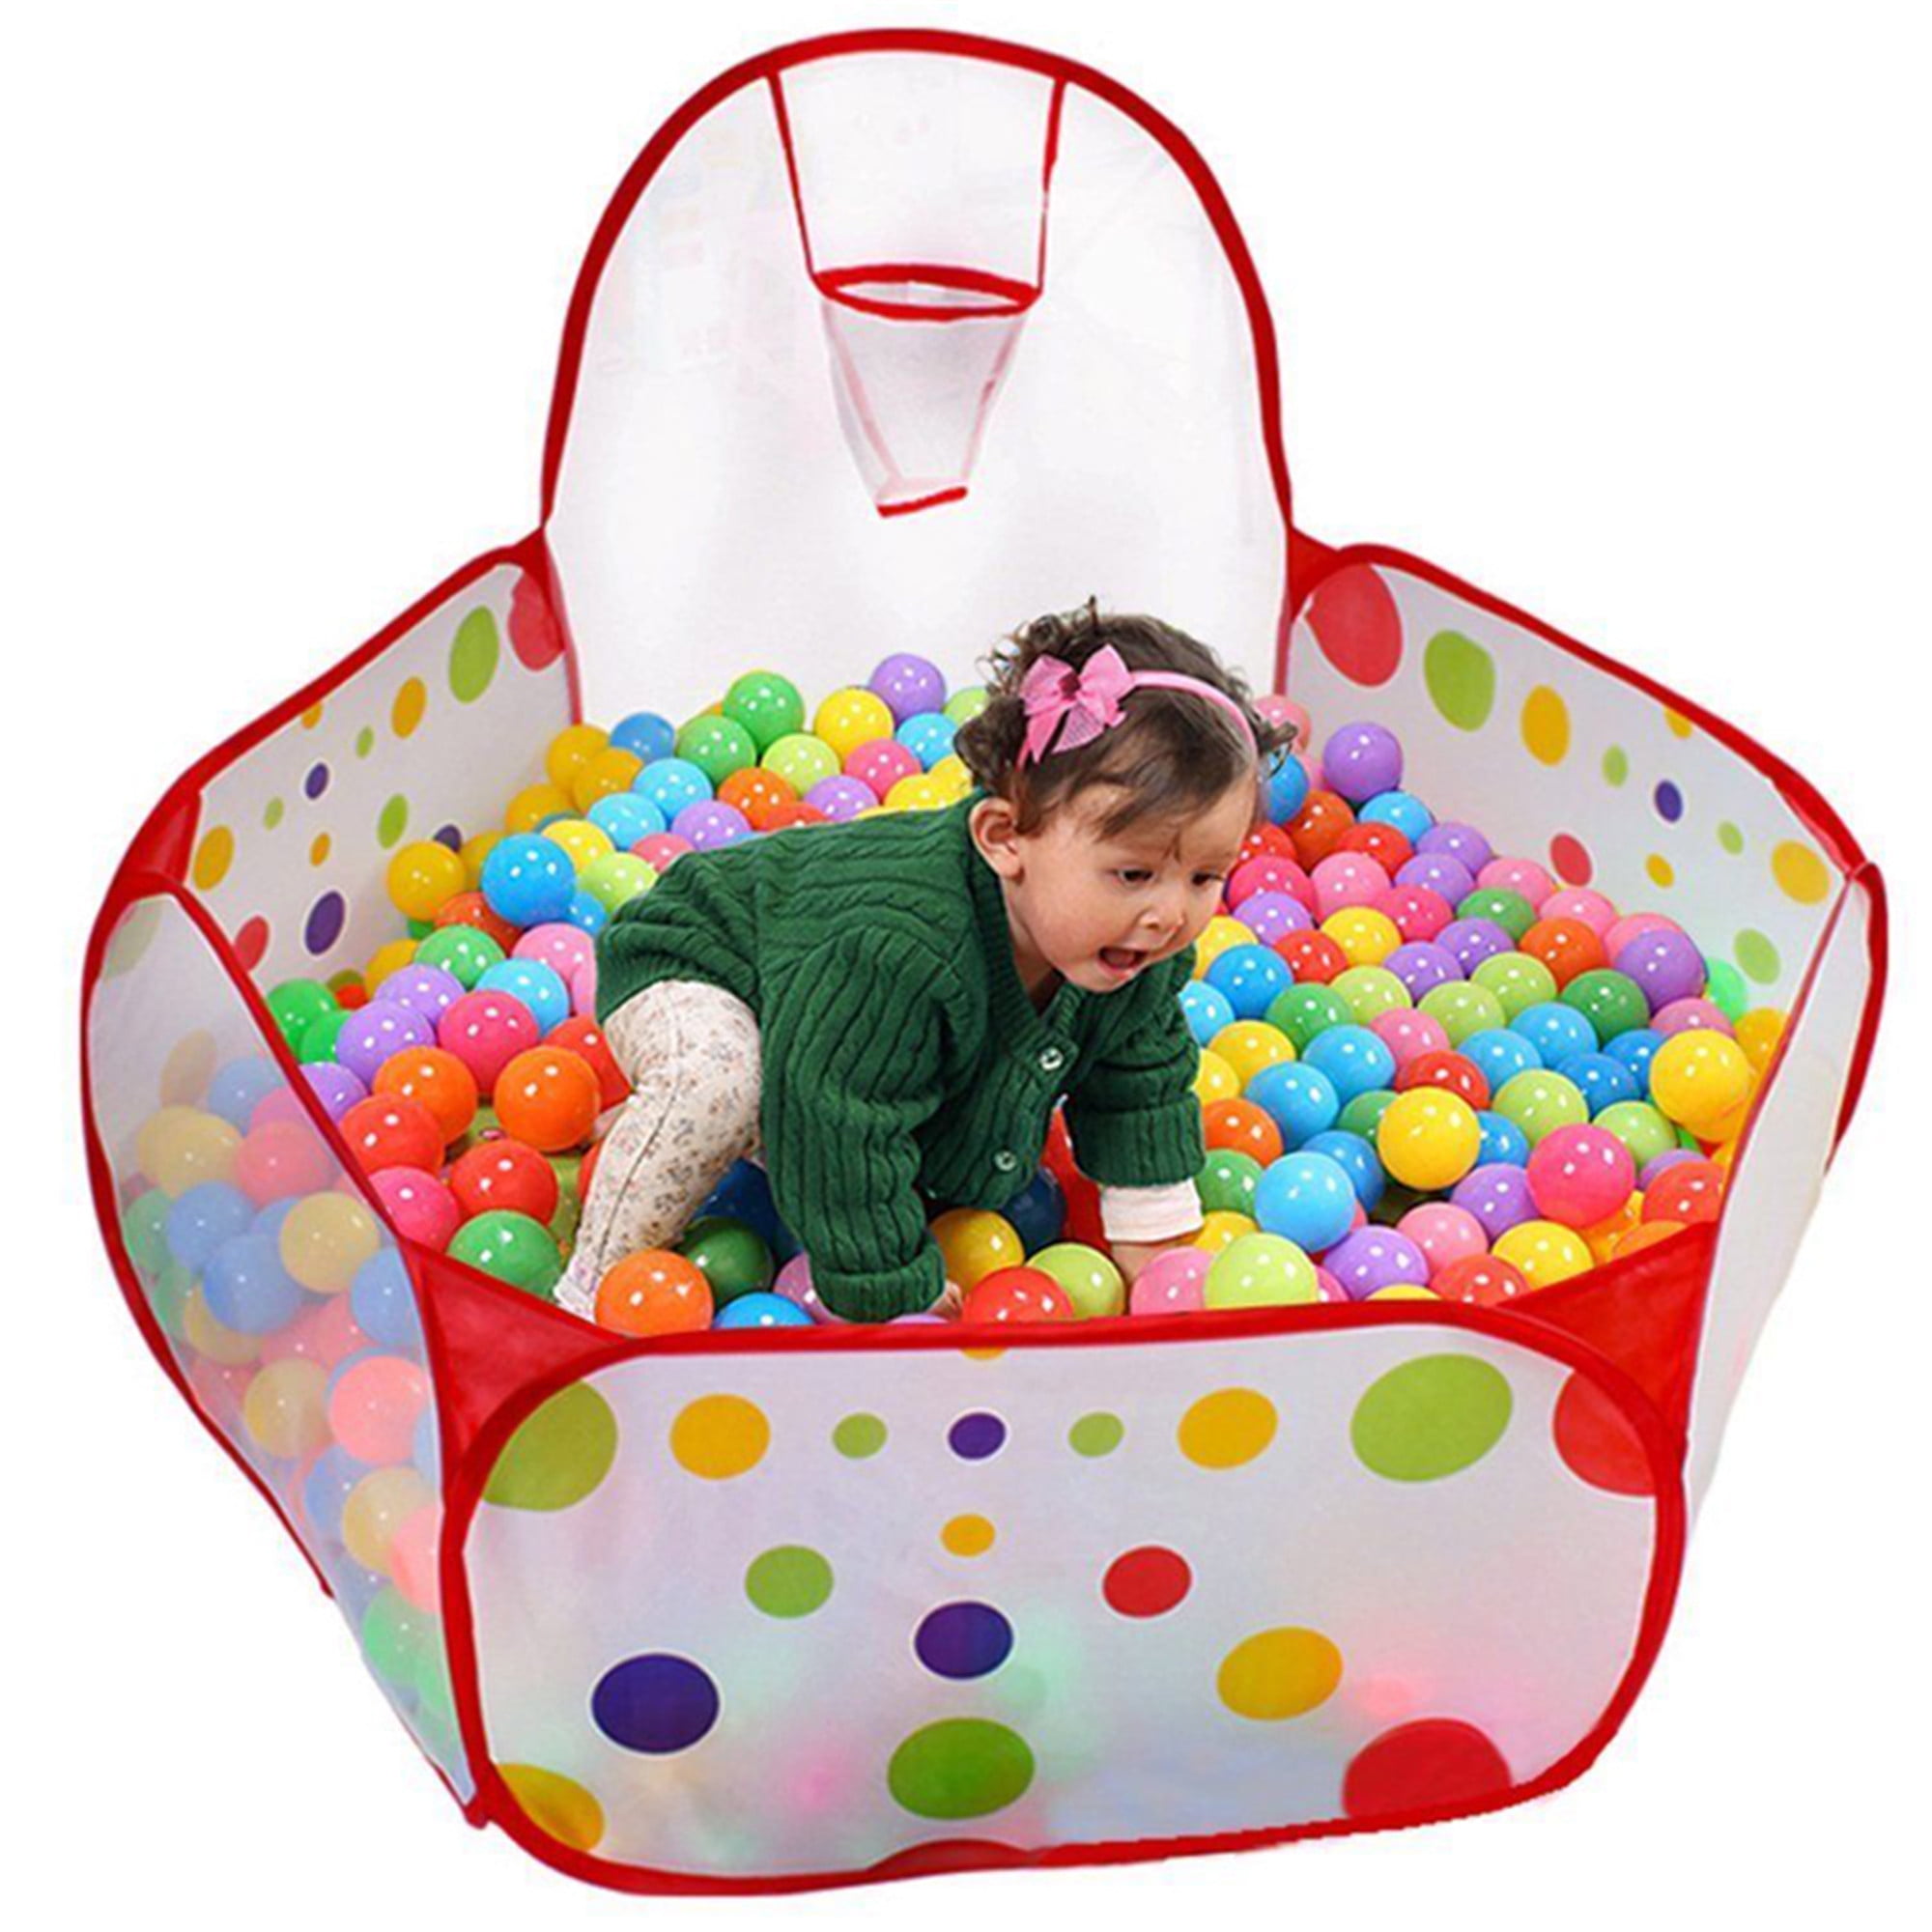 Hexagon Polka Dot Children Ball Play Pool Tent Carry Tote Toy Without Balls Cute 